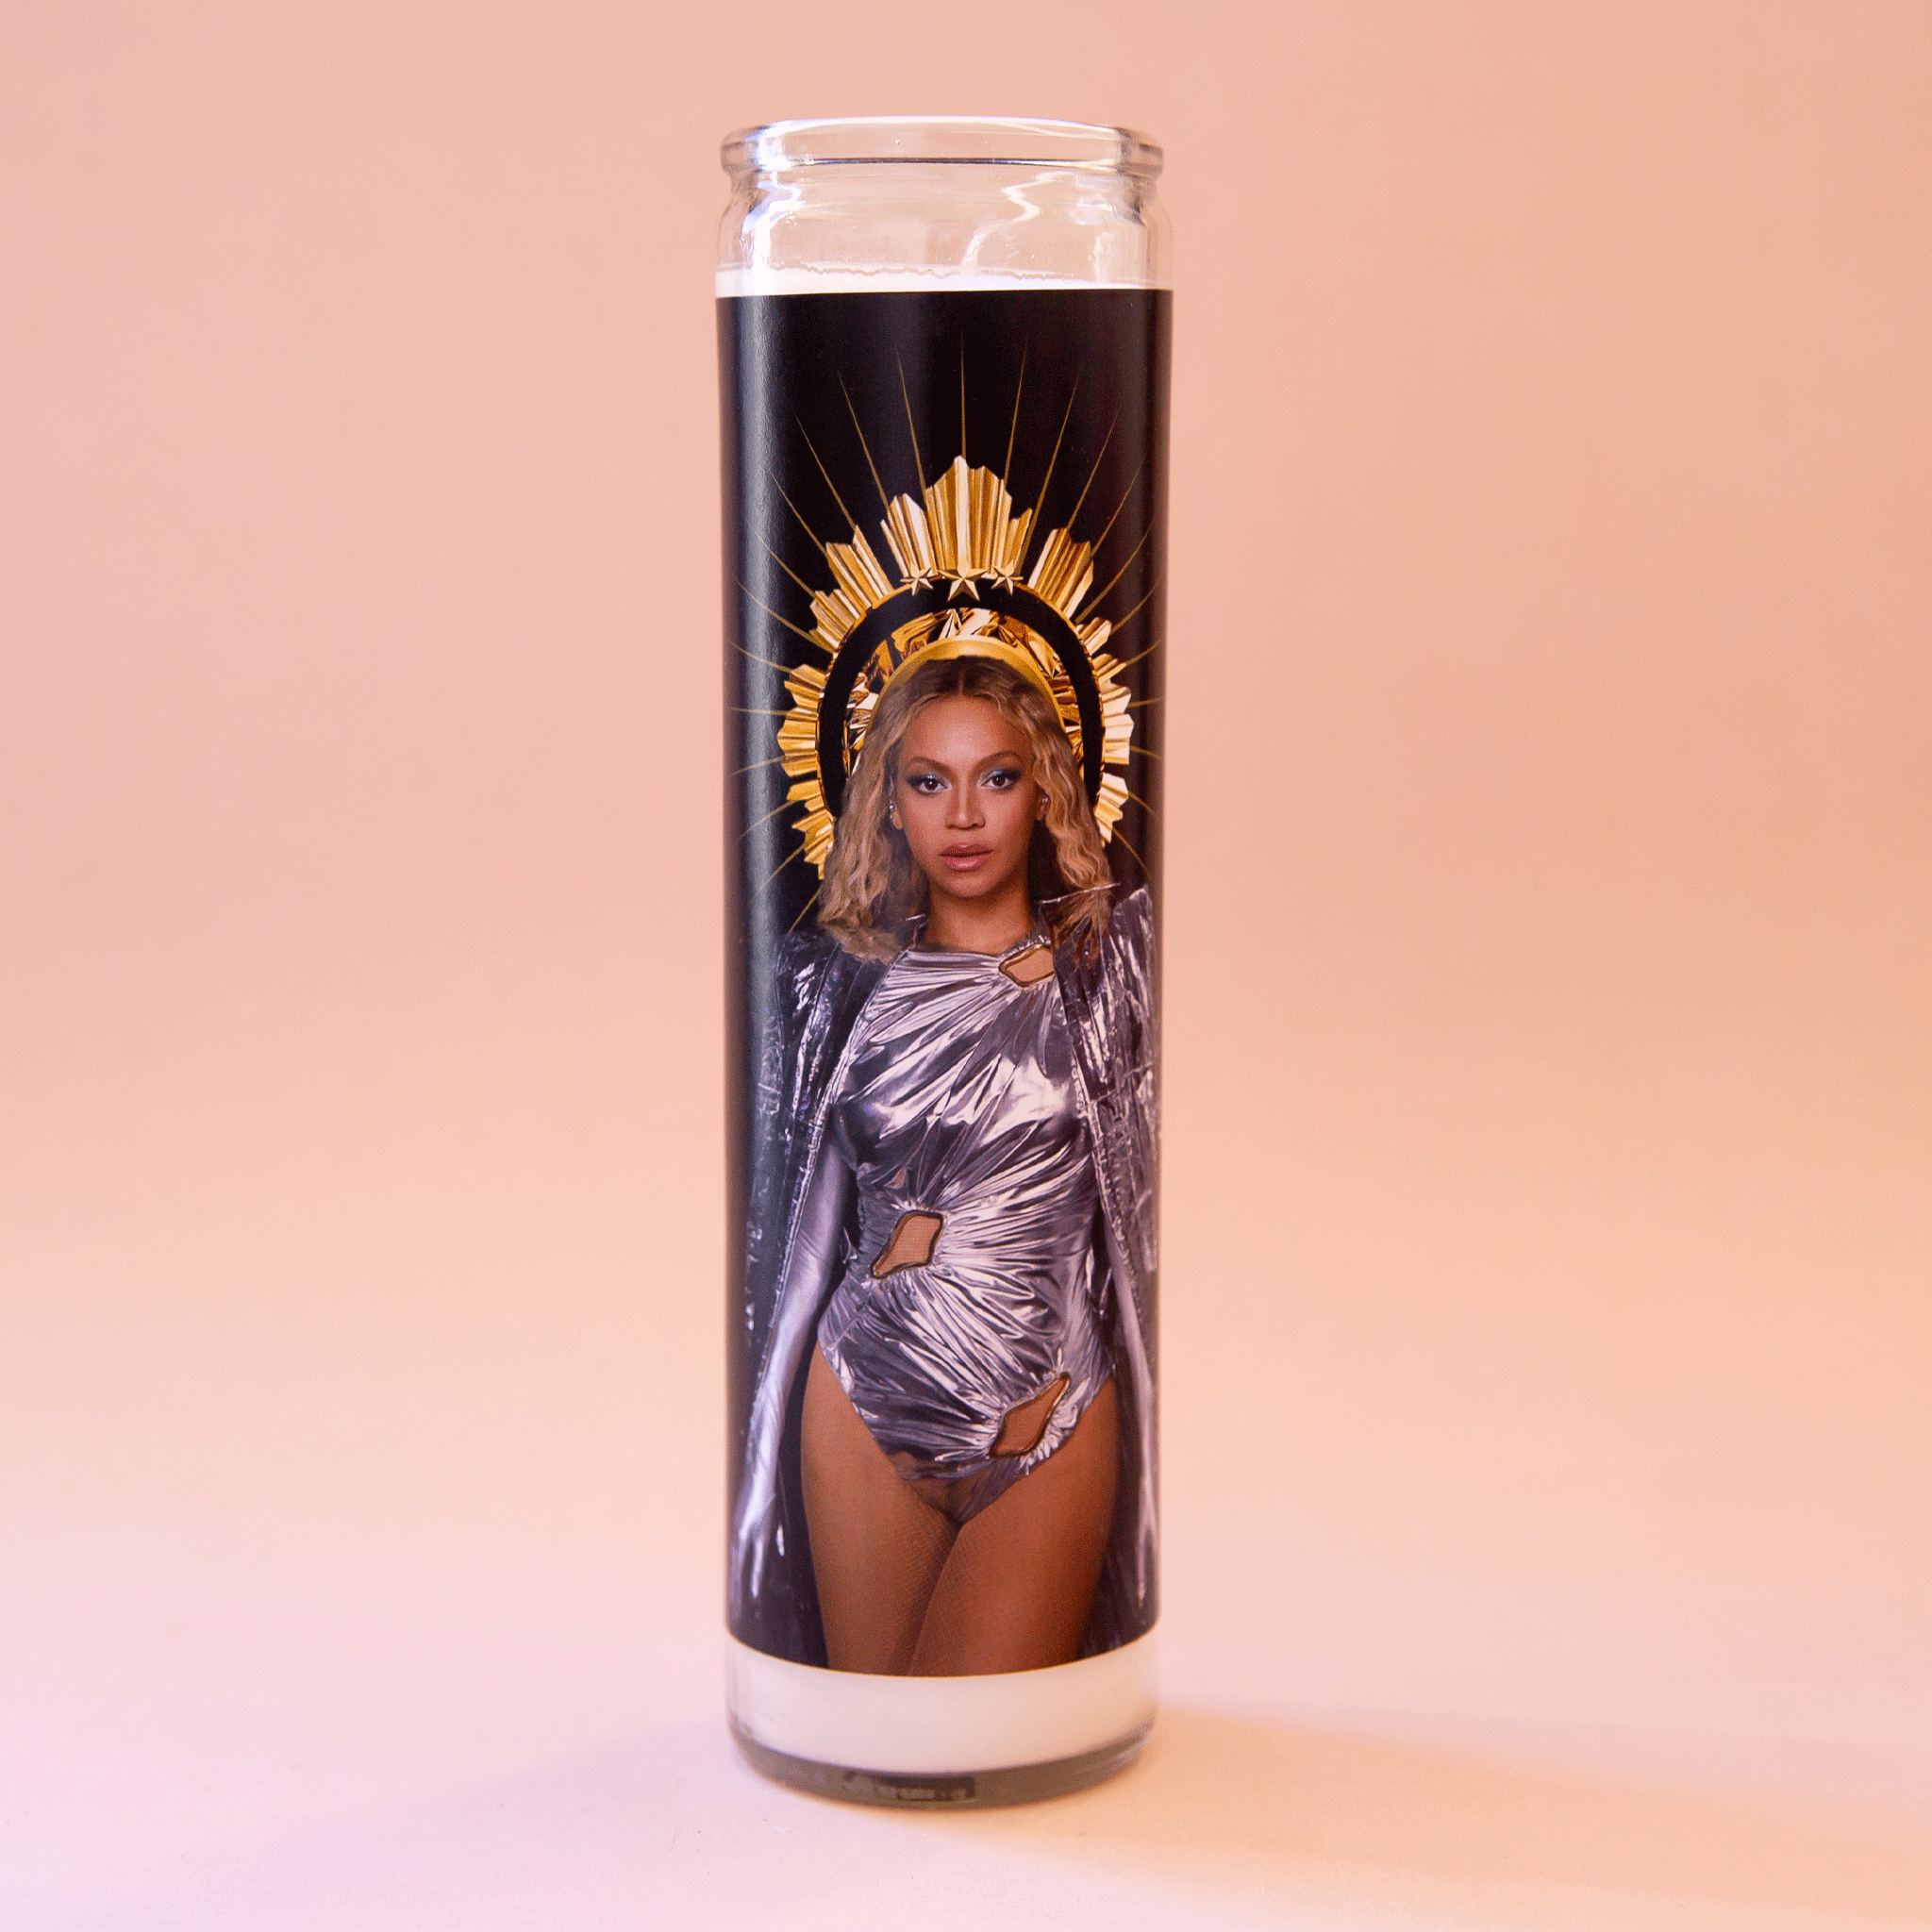 On a peach background is a prayer candle with a photo of Beyonce in a silver outfit with a crown and in front of a black background. 